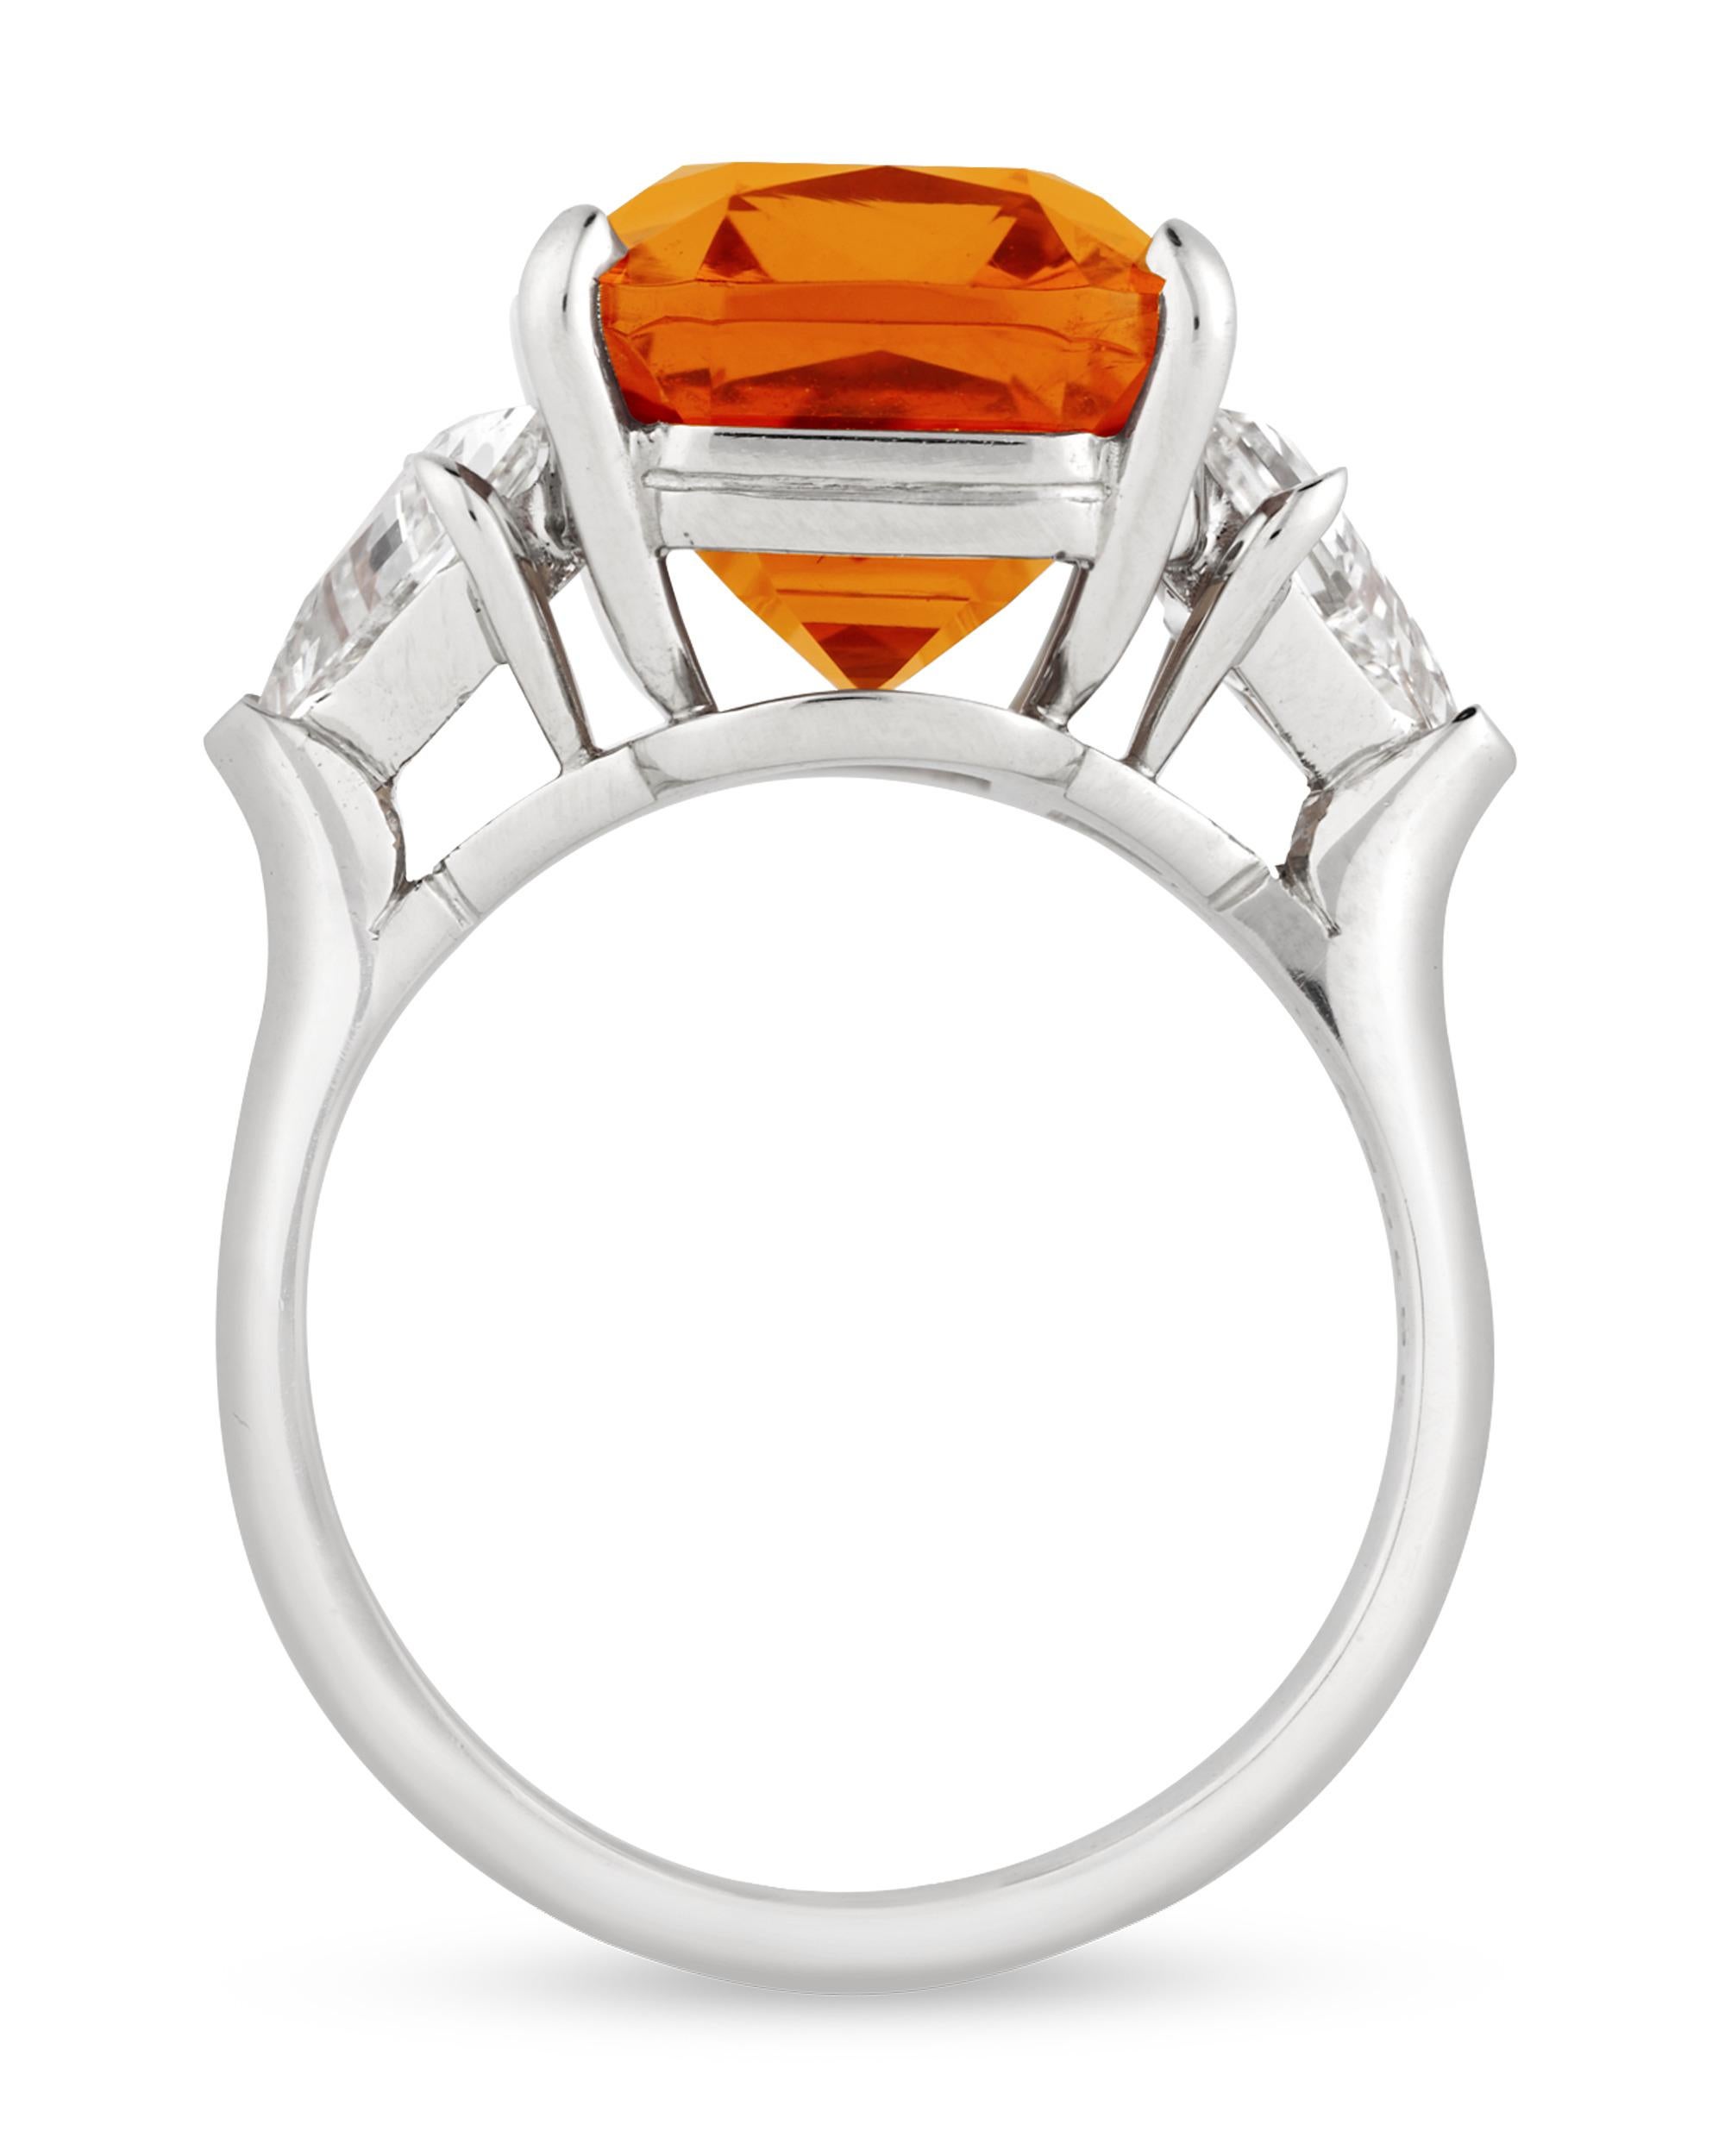 The radiance of the sunset shines from this rare orange Spessartite garnet ring by Oscar Heyman. Featuring a blazing mandarin color, the gemstone is certified by GemResearch Swisslabs as displaying a natural 